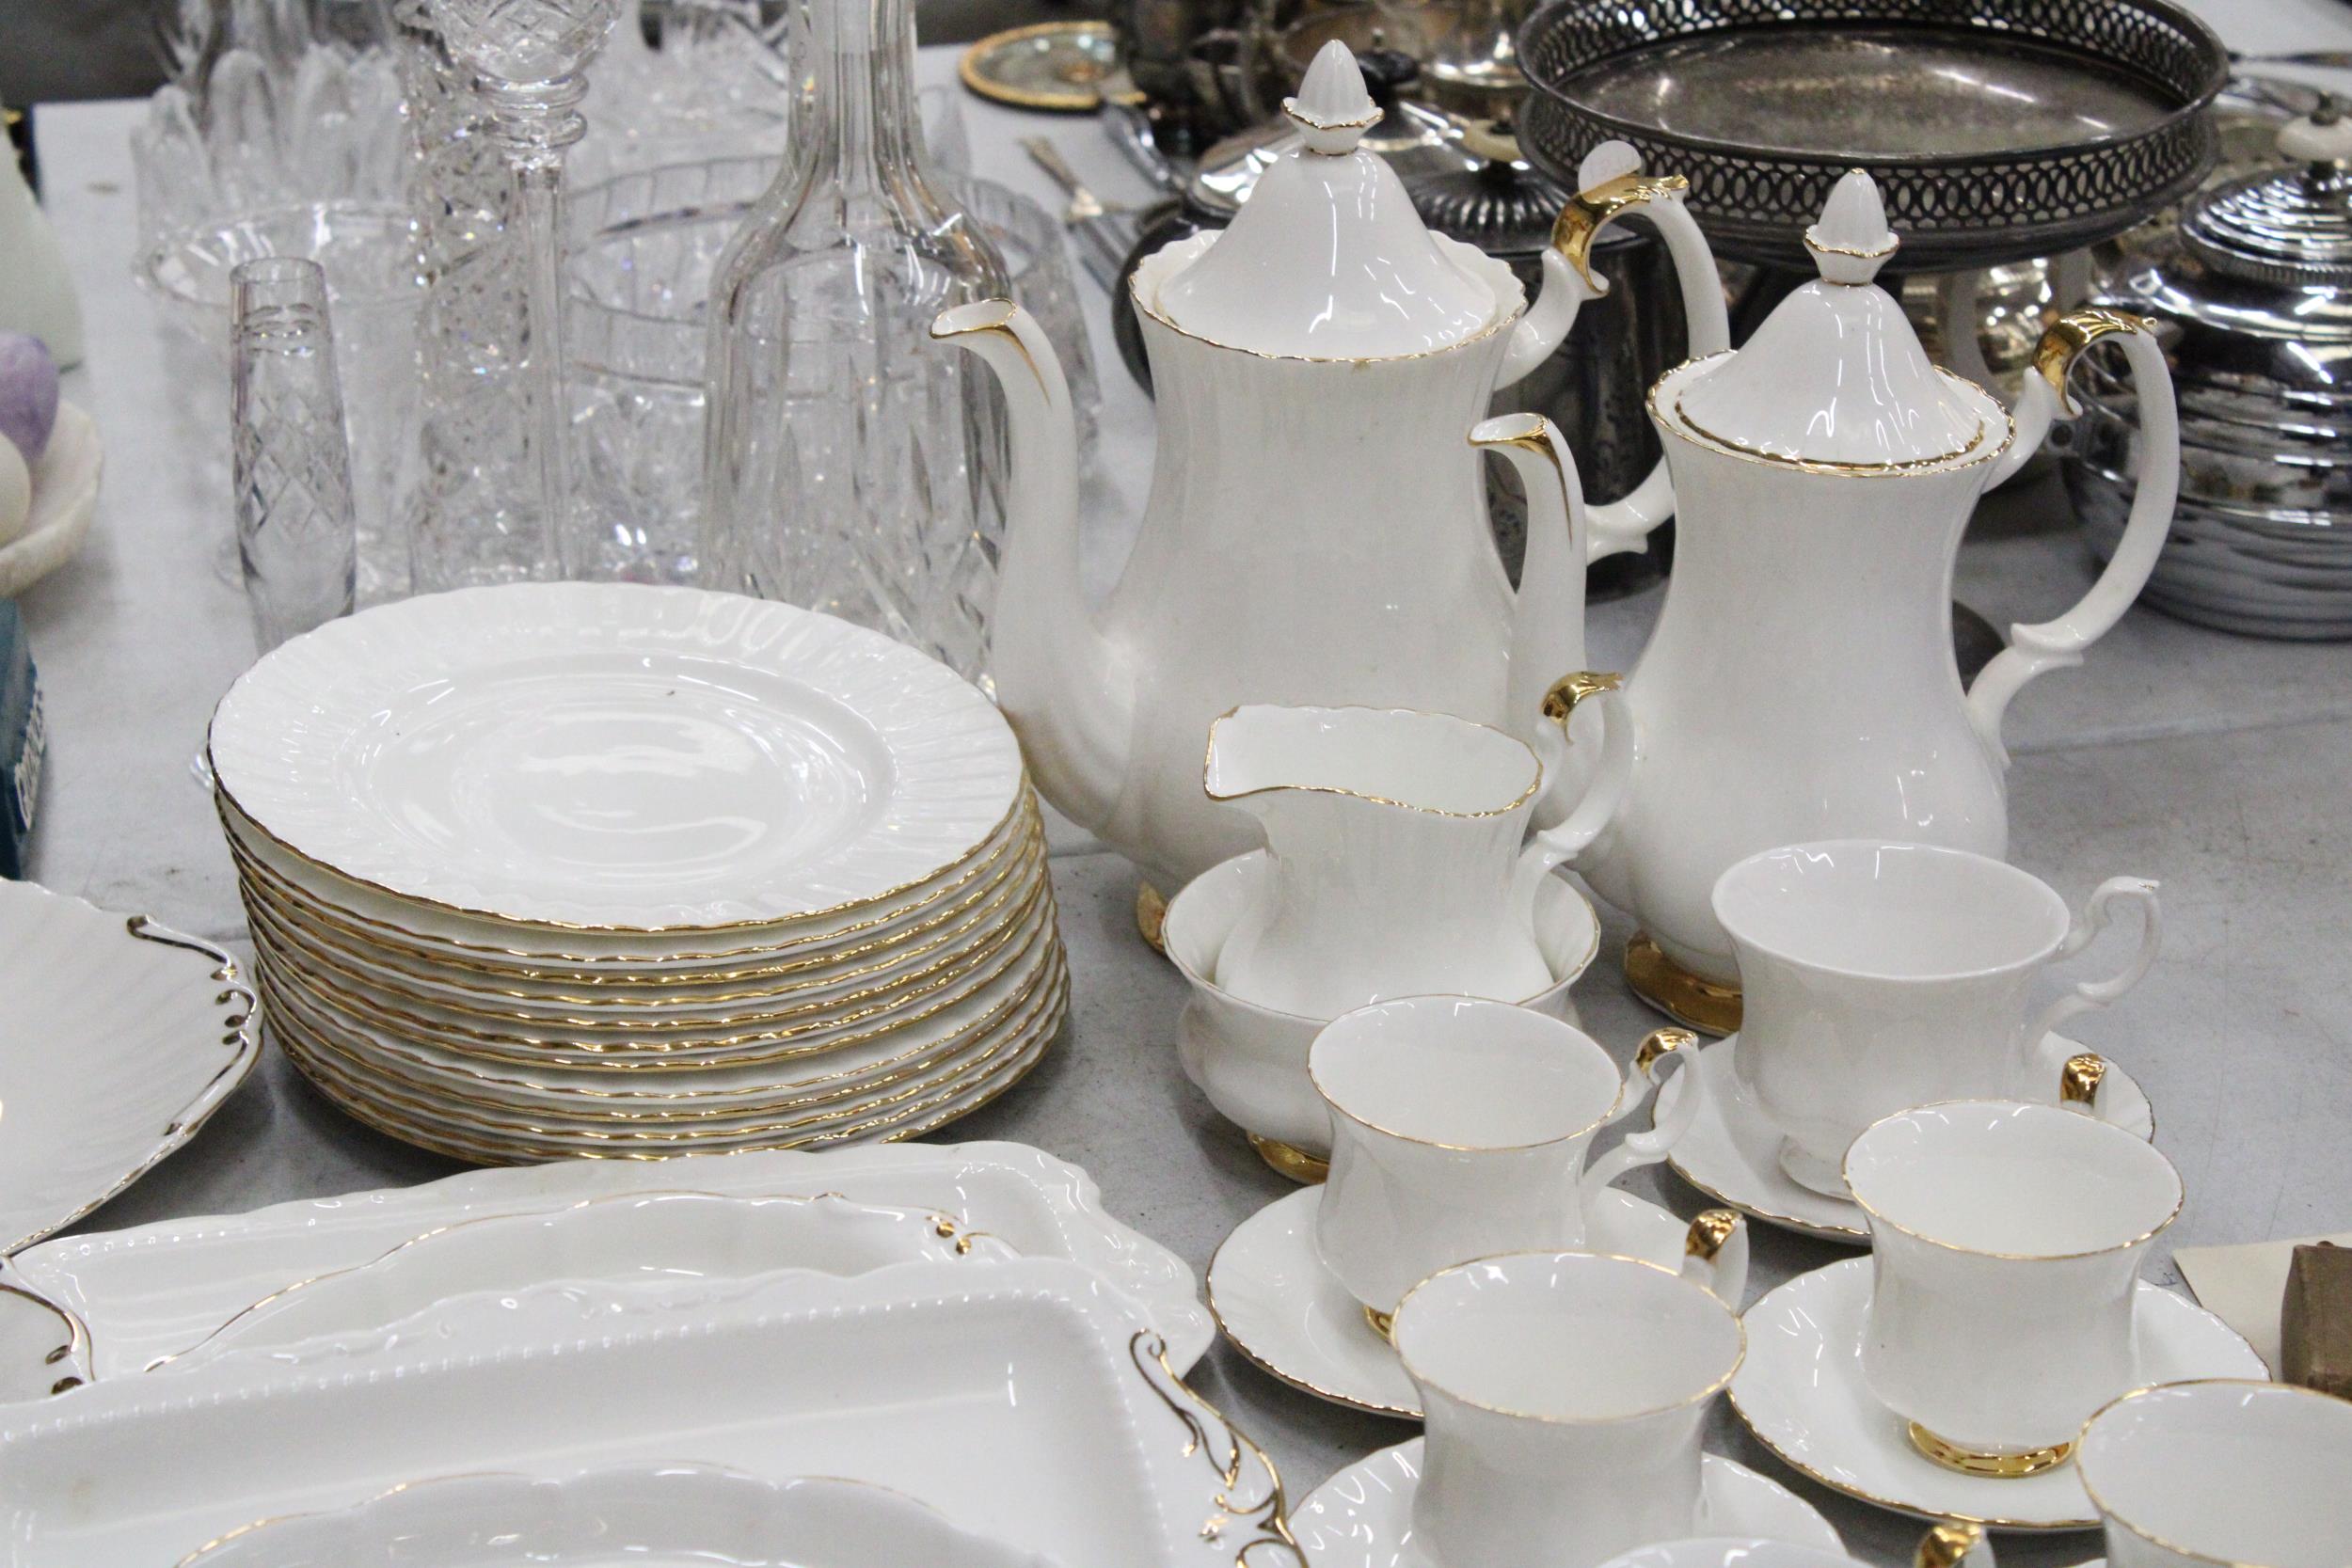 A LARGE ROYAL ALBERT PART DINNER SERVIE "VAL DOR" TO INCLUDE PLATES, CUPS, SAUCERS, TEAPOT, COFFEE - Image 4 of 6